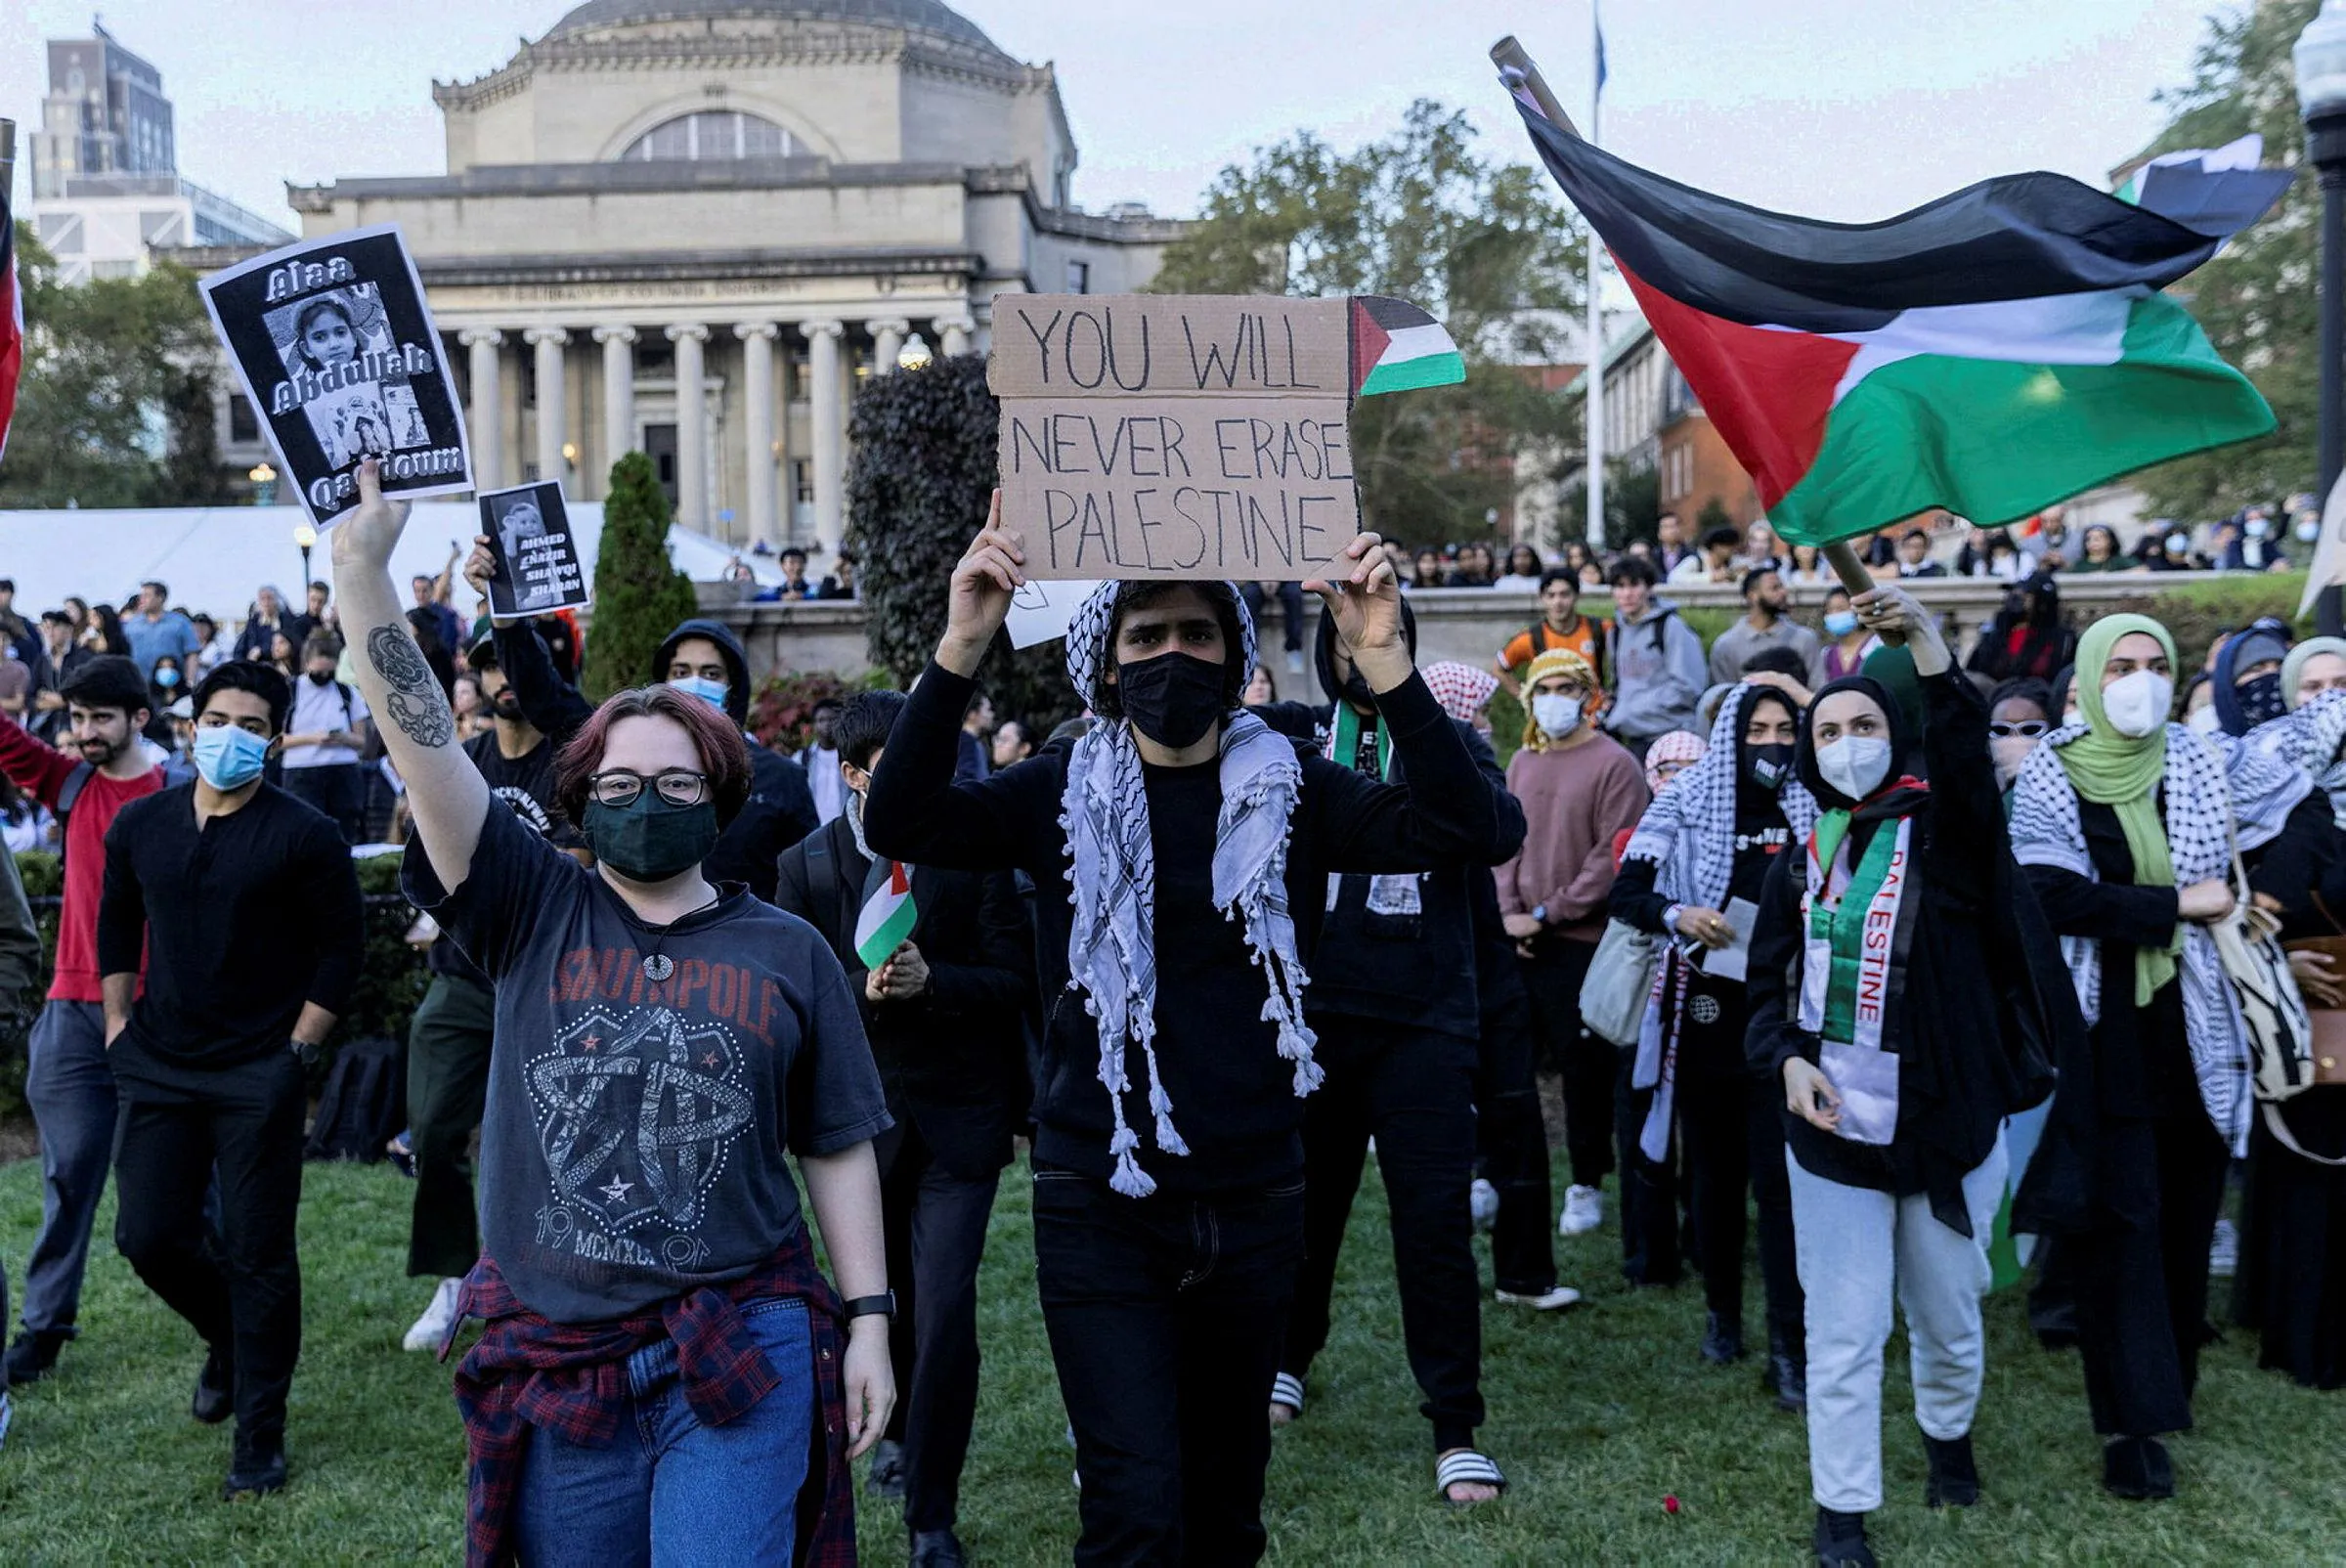 Columbia’s Unyielding Voice: A New Chapter in Gaza Advocacy”